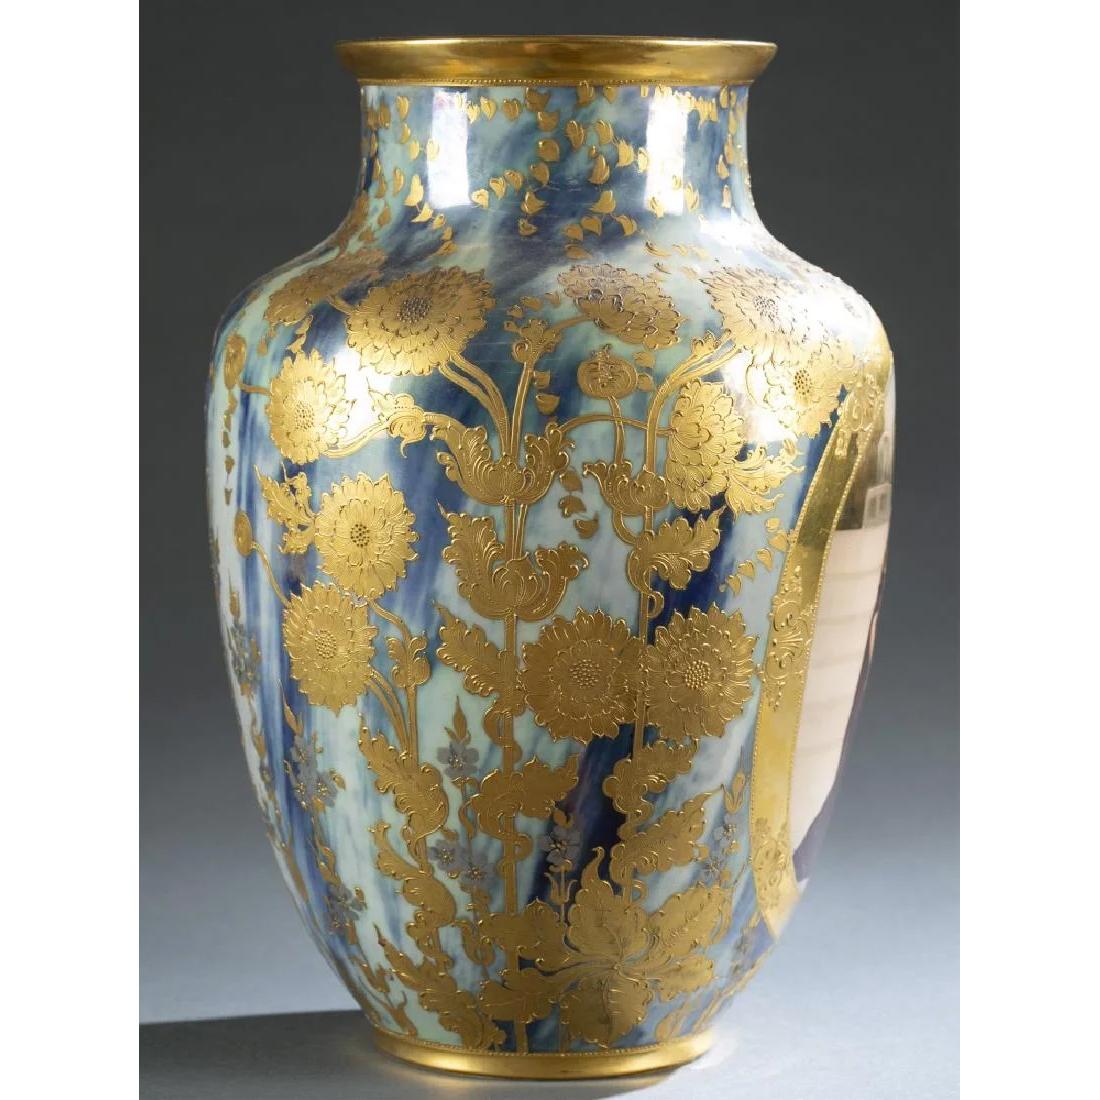 Painted Late 19th Century Royal Vienna Porcelain Vase in Gilt Floral Design For Sale